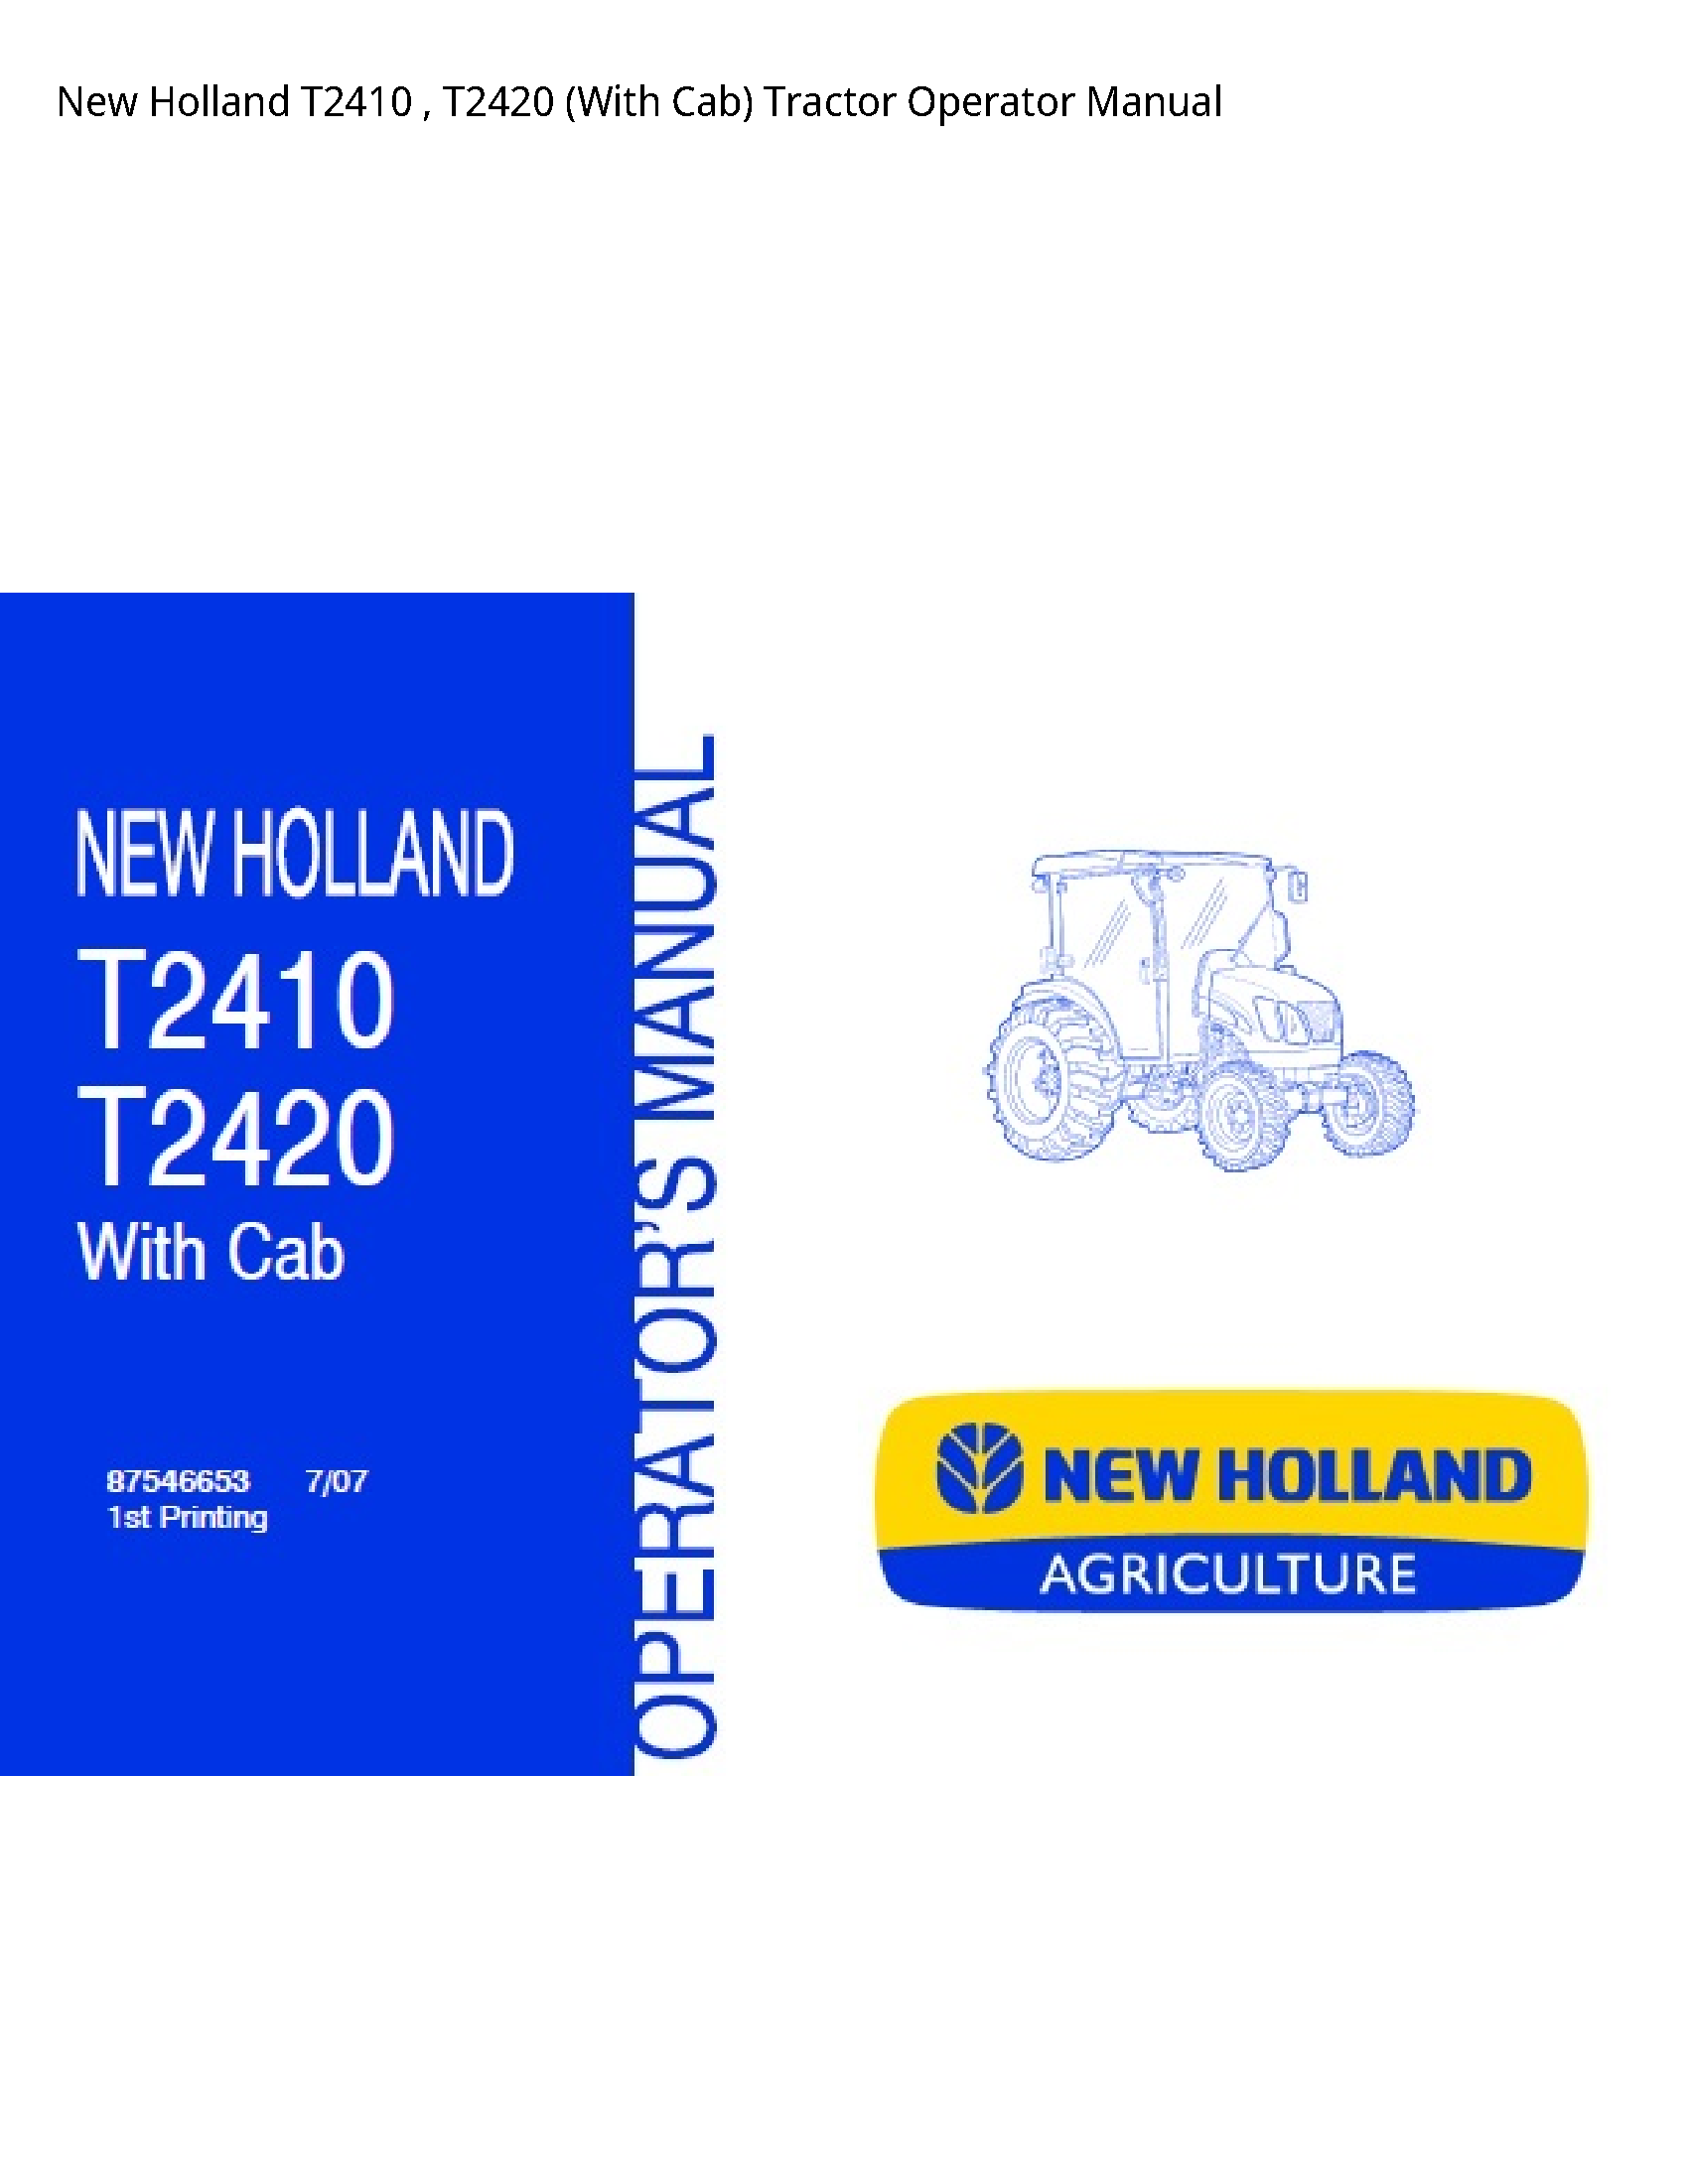 New Holland T2410 (With Cab) Tractor Operator manual